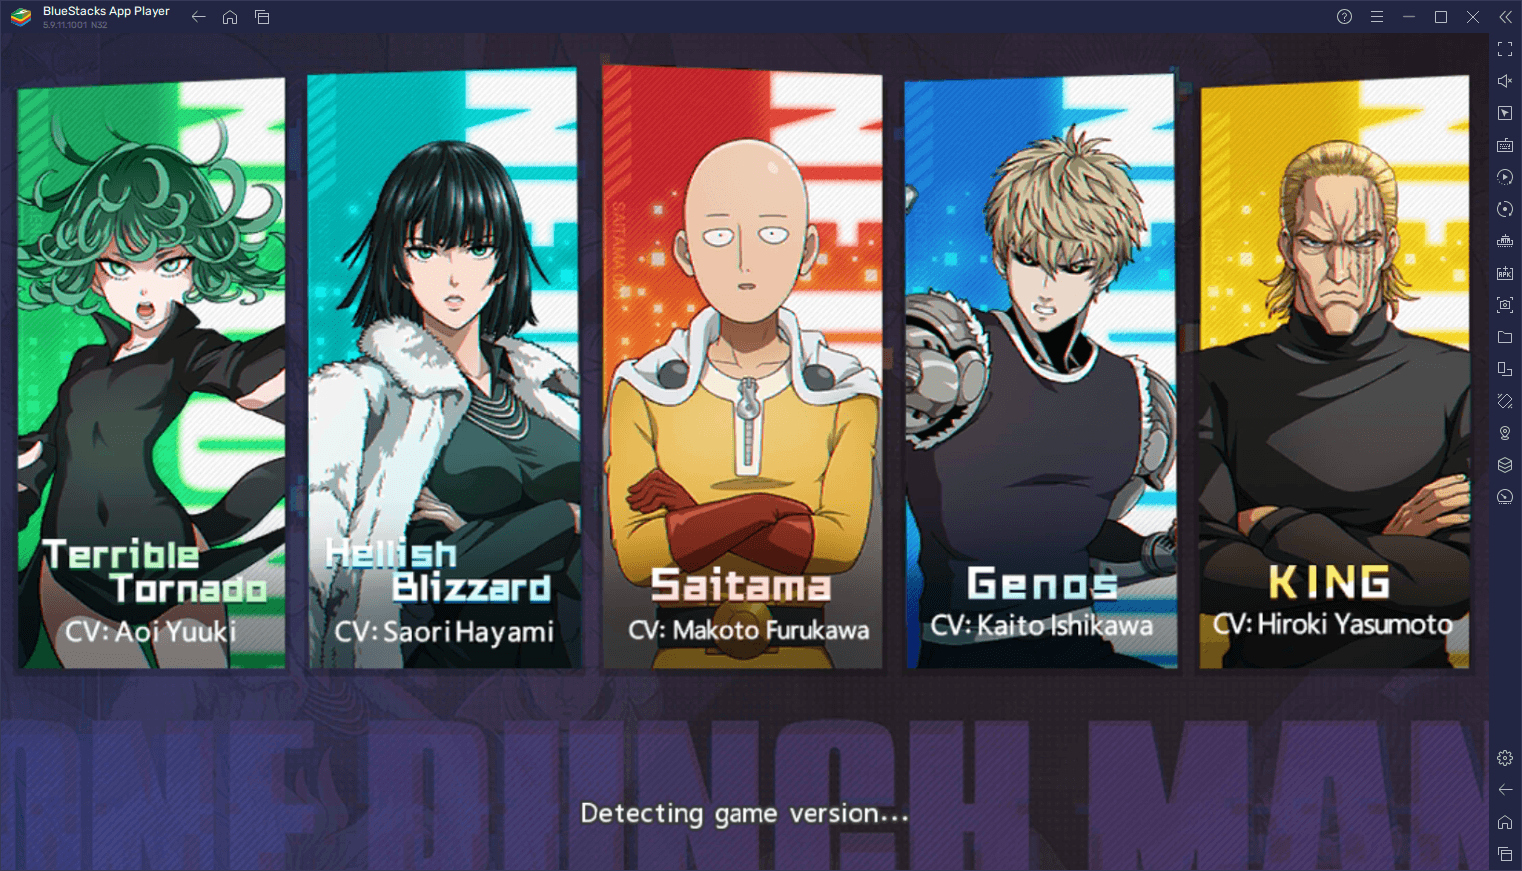 One Punch Man - The Strongest Review - Relive the Events of the Hit Anime in Glorious RPG Fashion